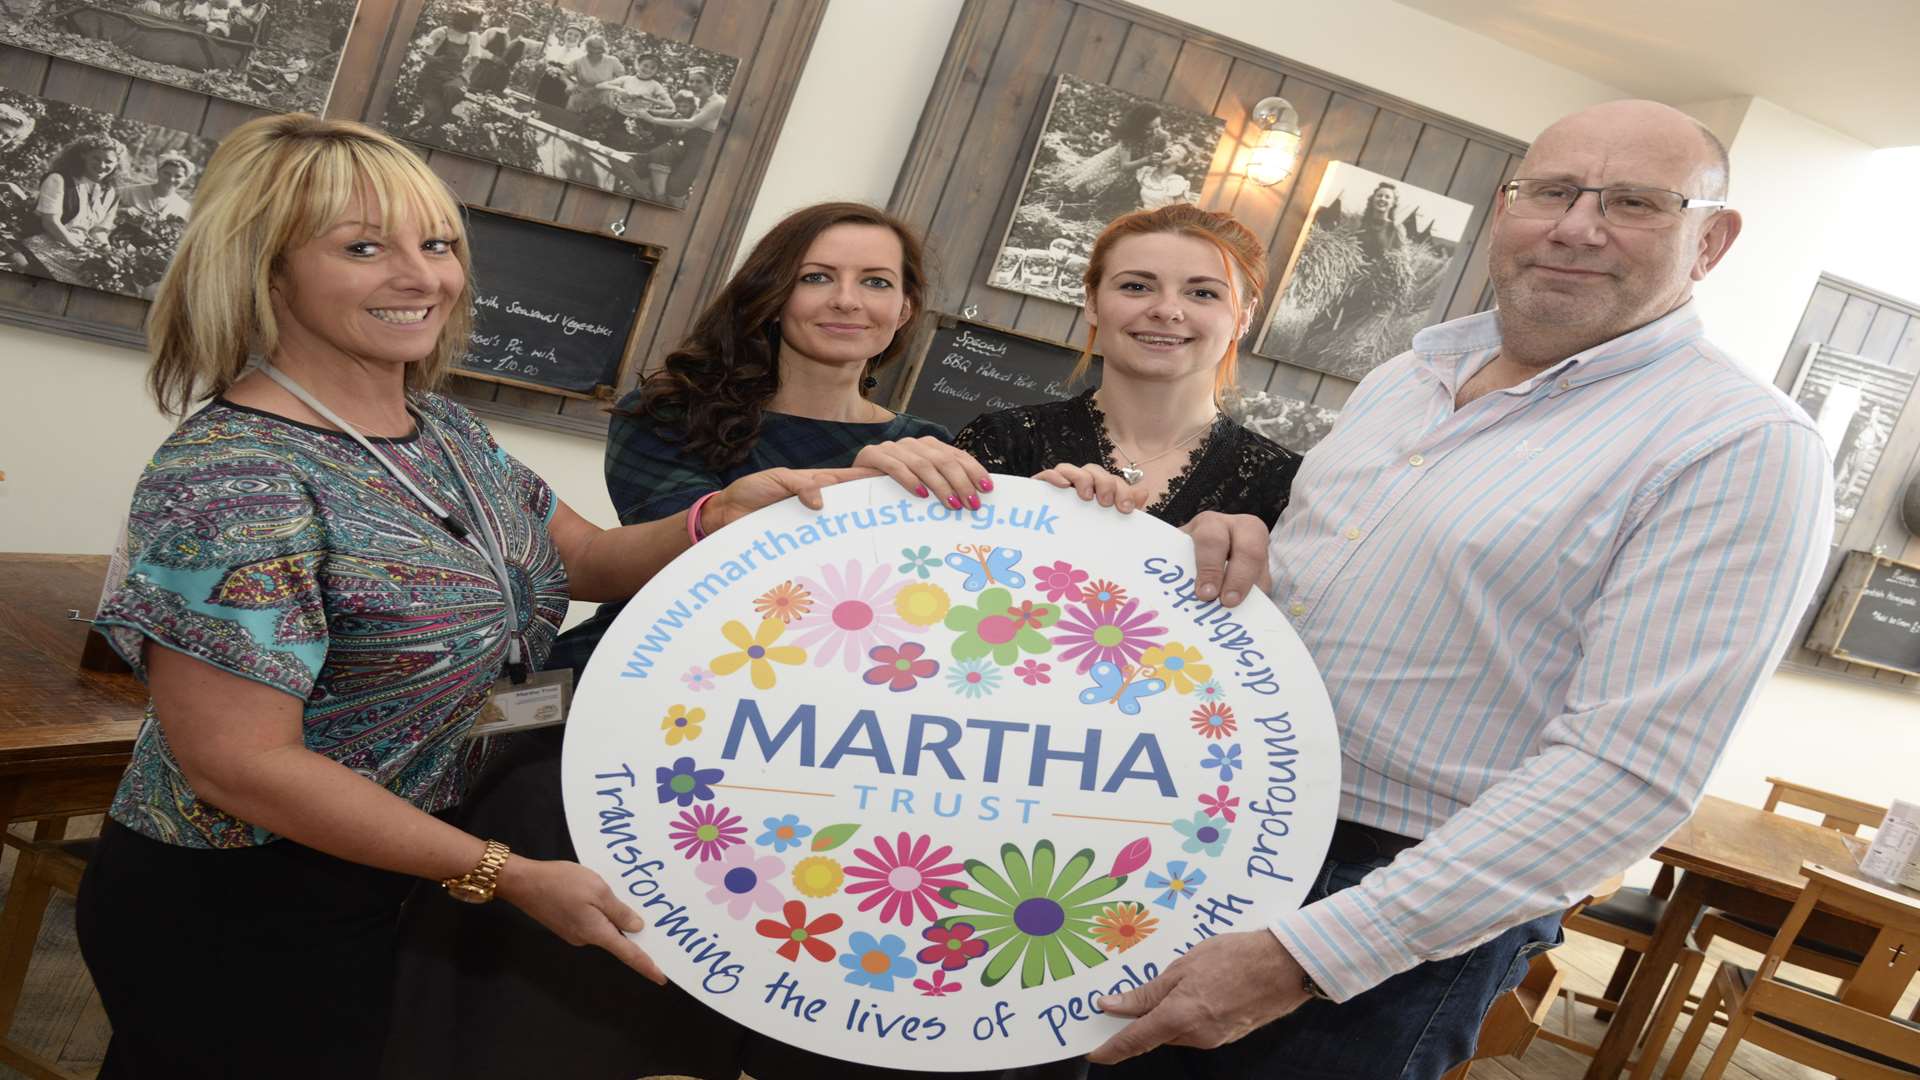 Kerry Rubins from the Martha Trust with Claire Clayson, Kyrstie and Ian Linstead